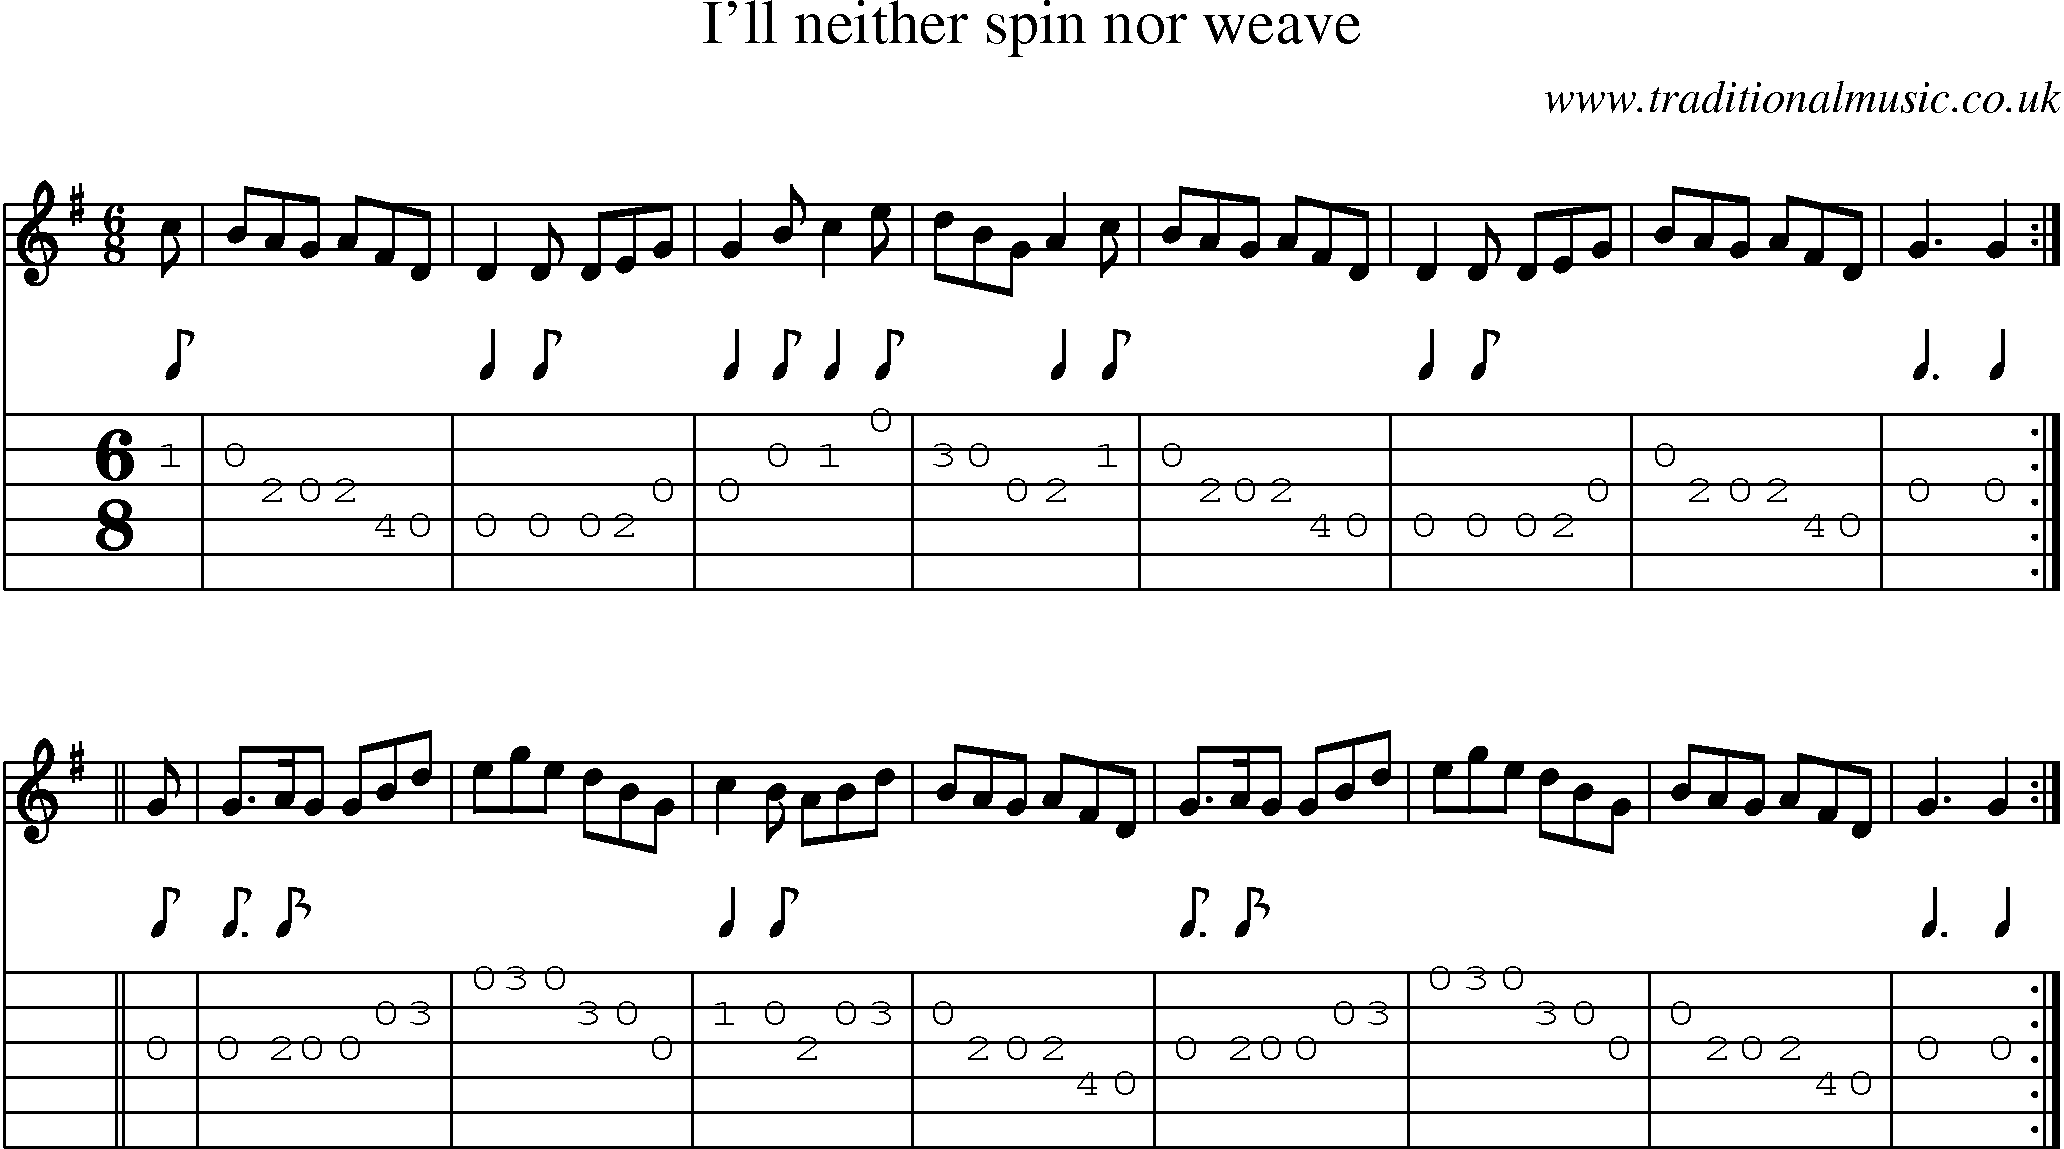 Music Score and Guitar Tabs for Ill Neither Spin Nor Weave